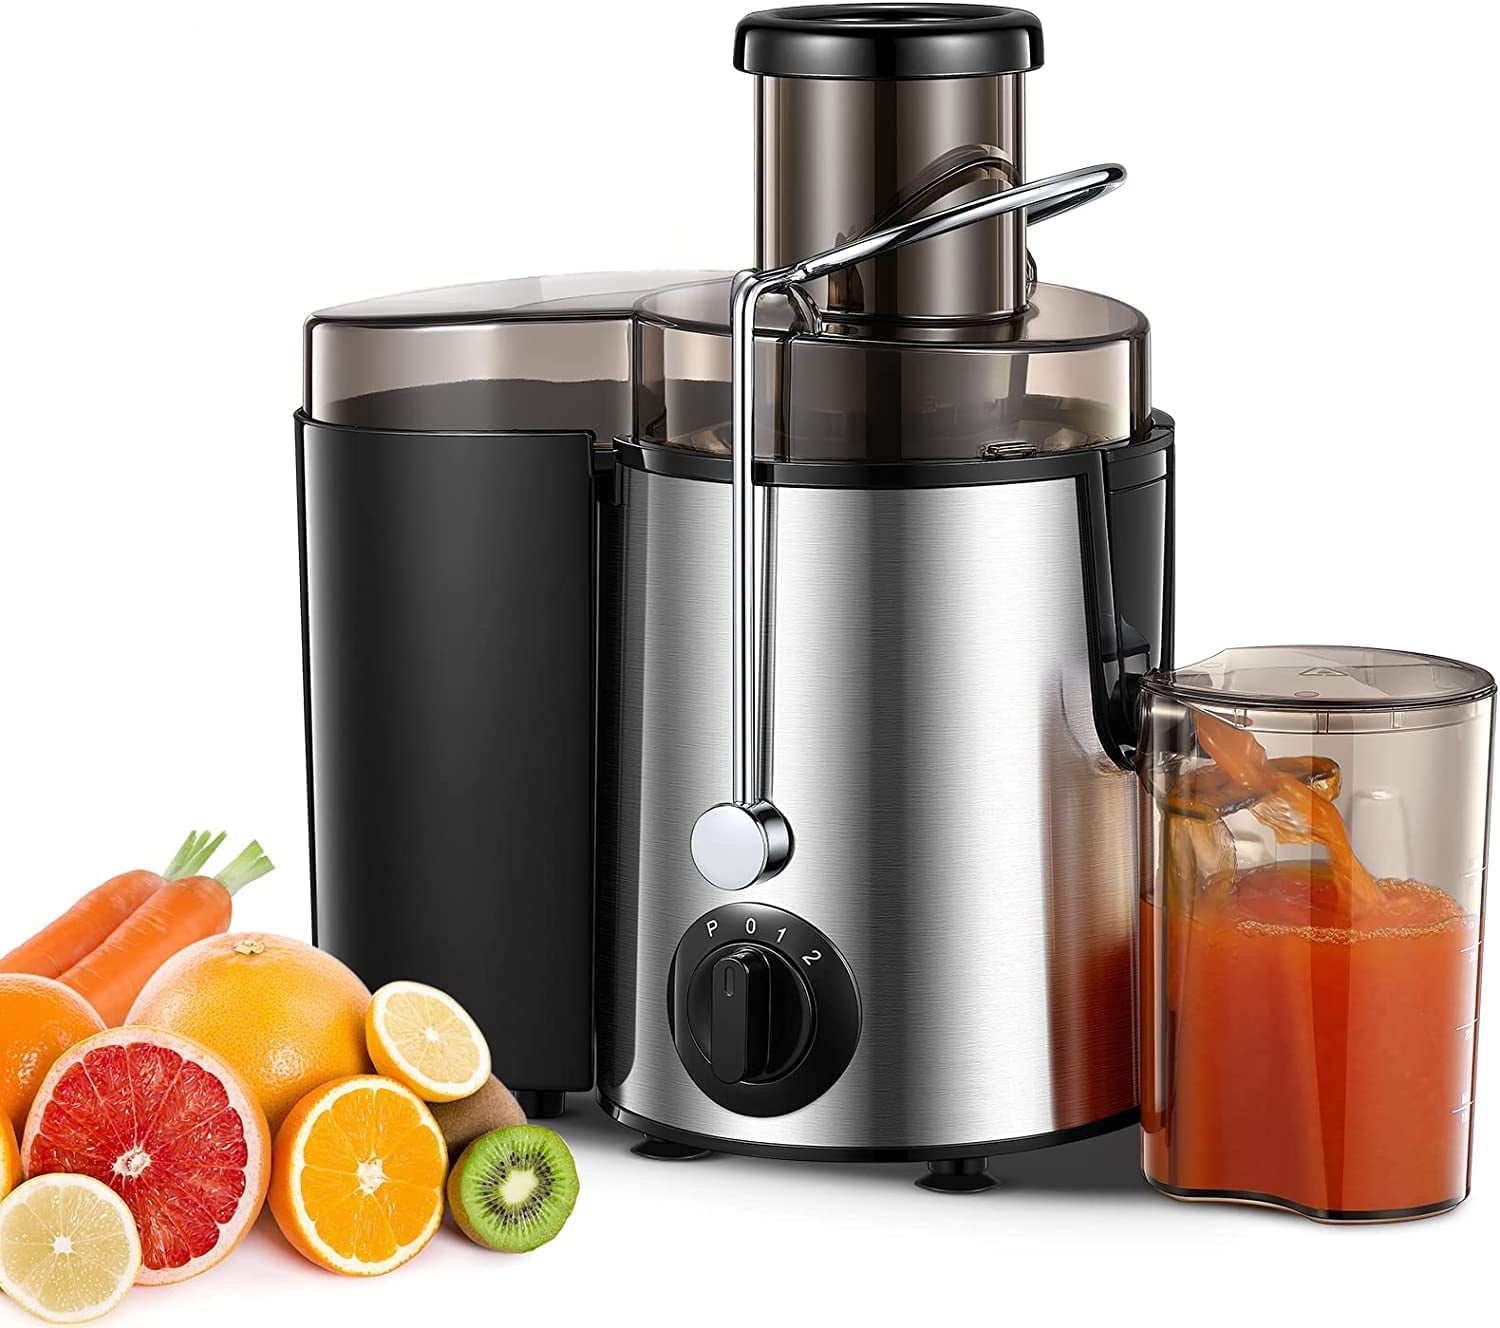 Juicer, Juicer Machine Vegetable and Fruit, Juice Extractor Easy to Clean,  Centrifugal Juicer with 3'' Feed Chute, Stainless Steel, 3 Speed,  Anti-Drip, Included Brush, 400W, Black 